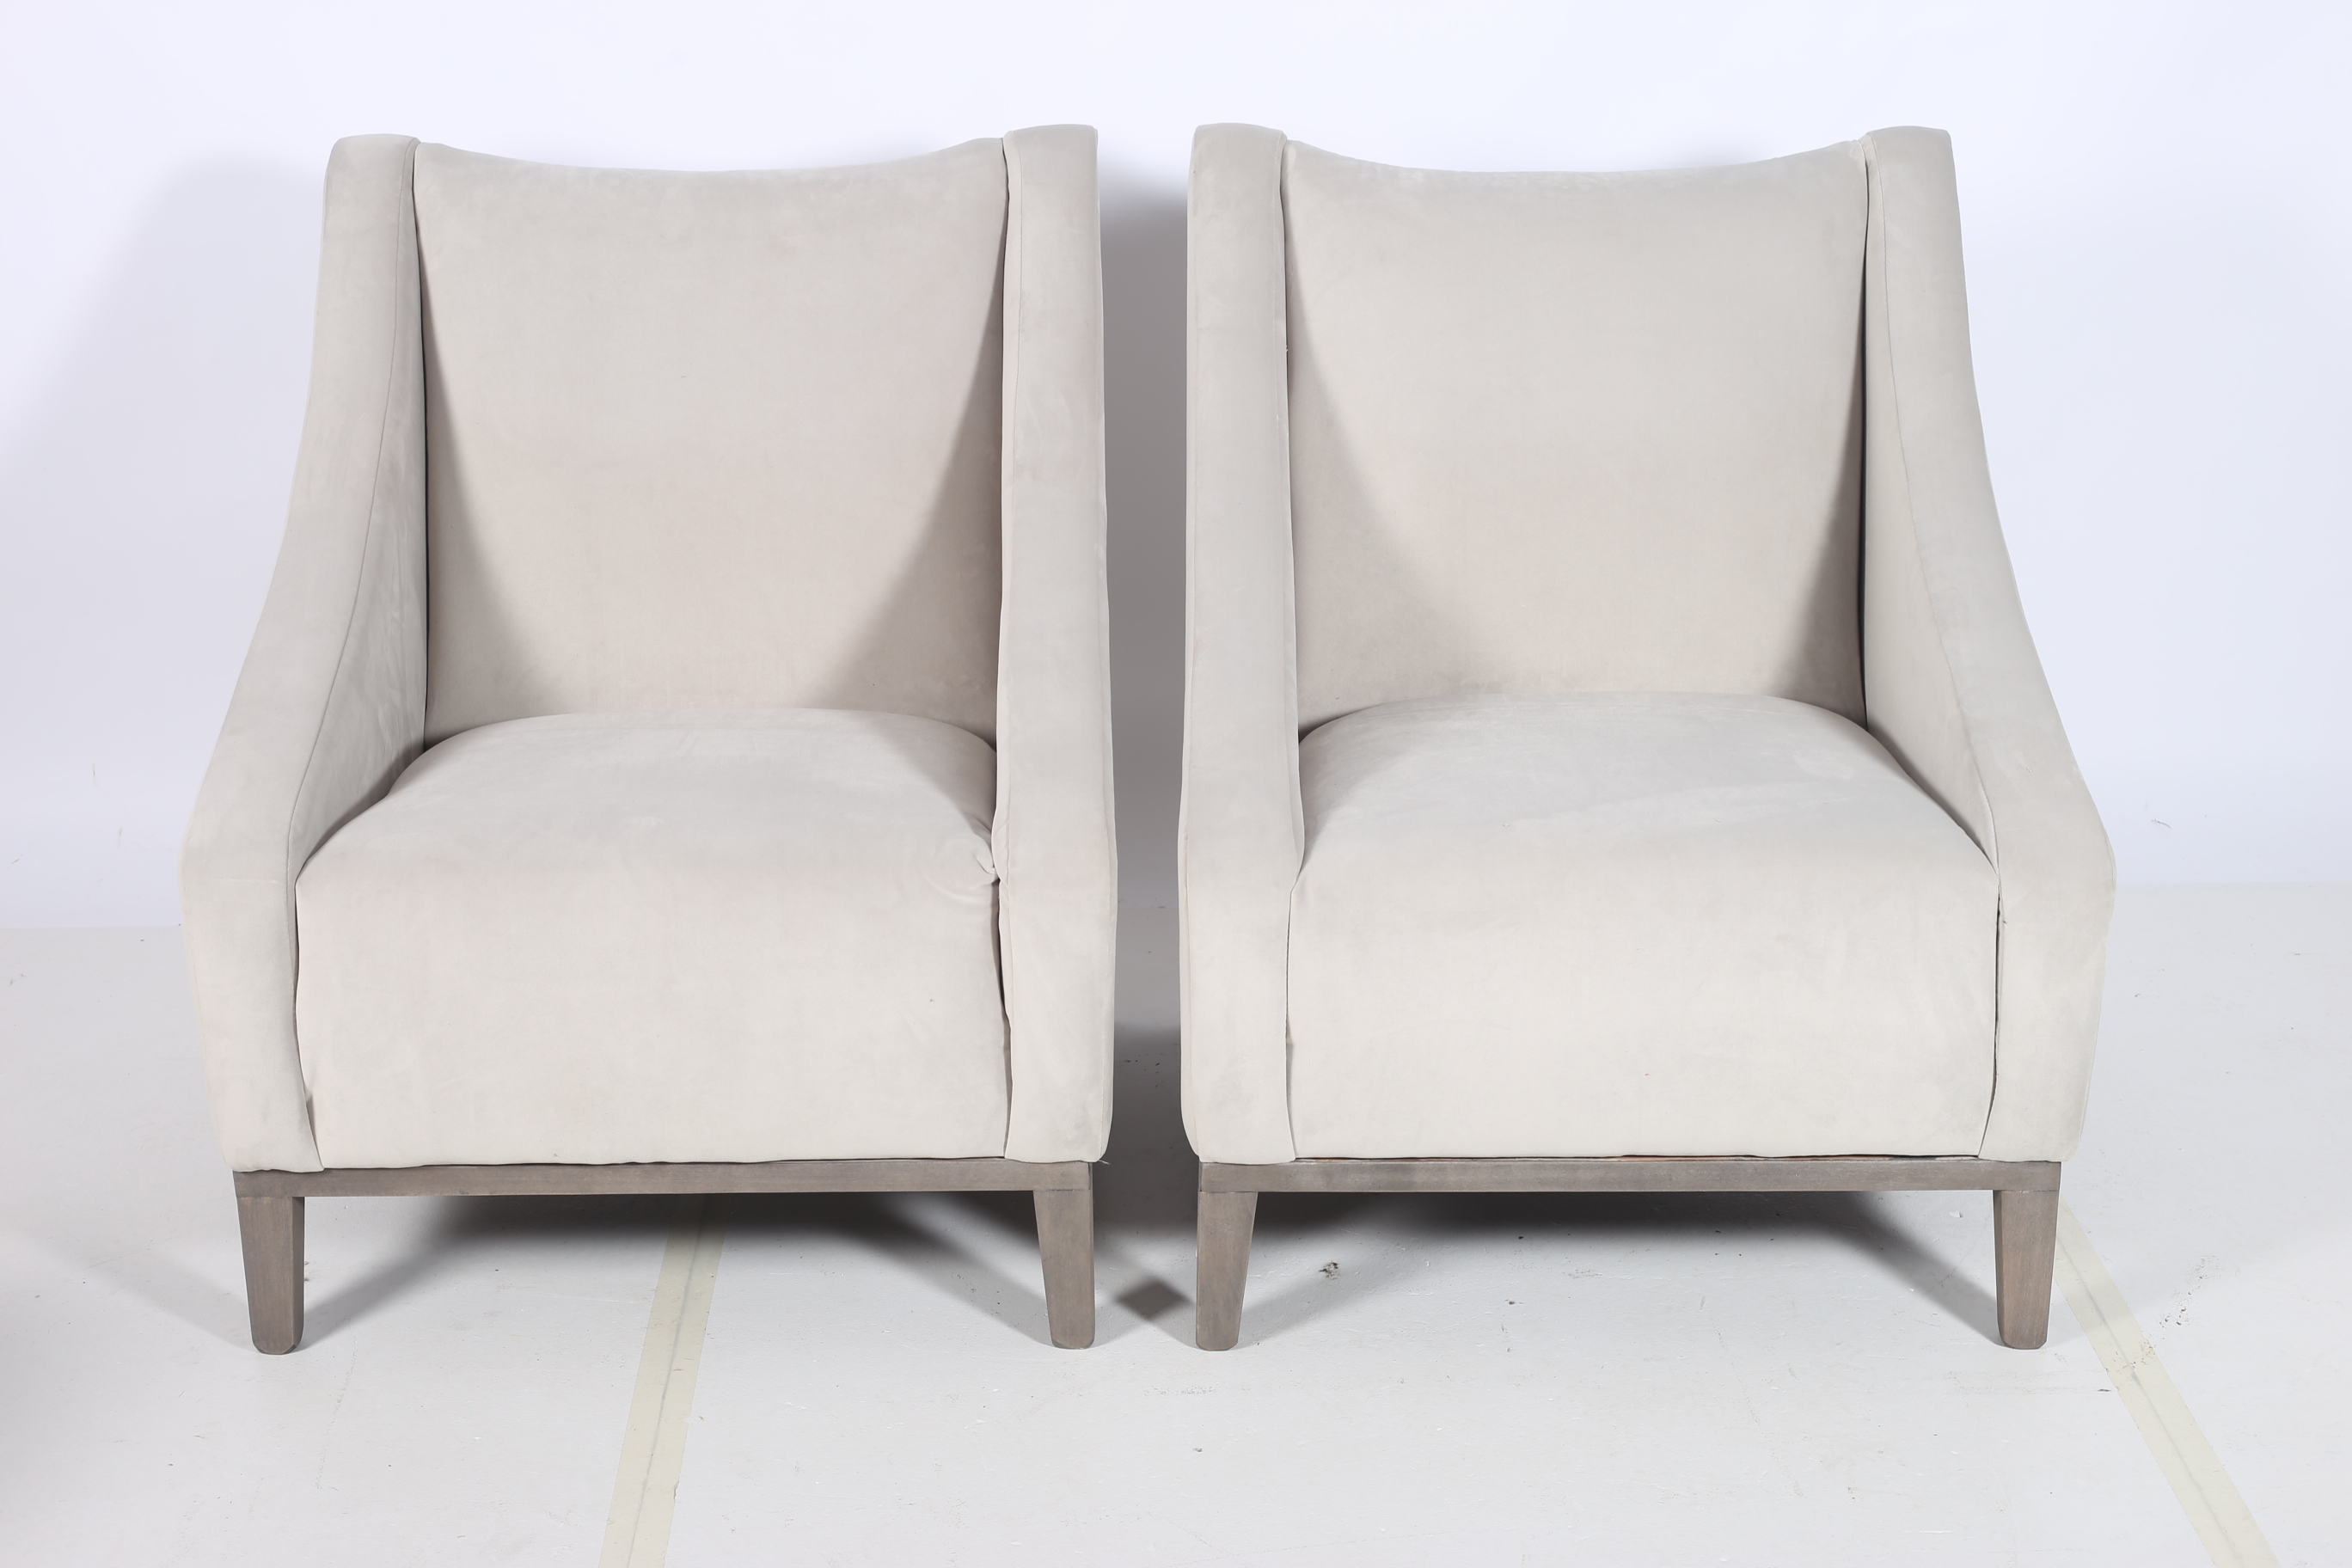 A PAIR OF RETRO EASY CHAIRS each with a shaped back and curved arms on square moulded legs en-suite